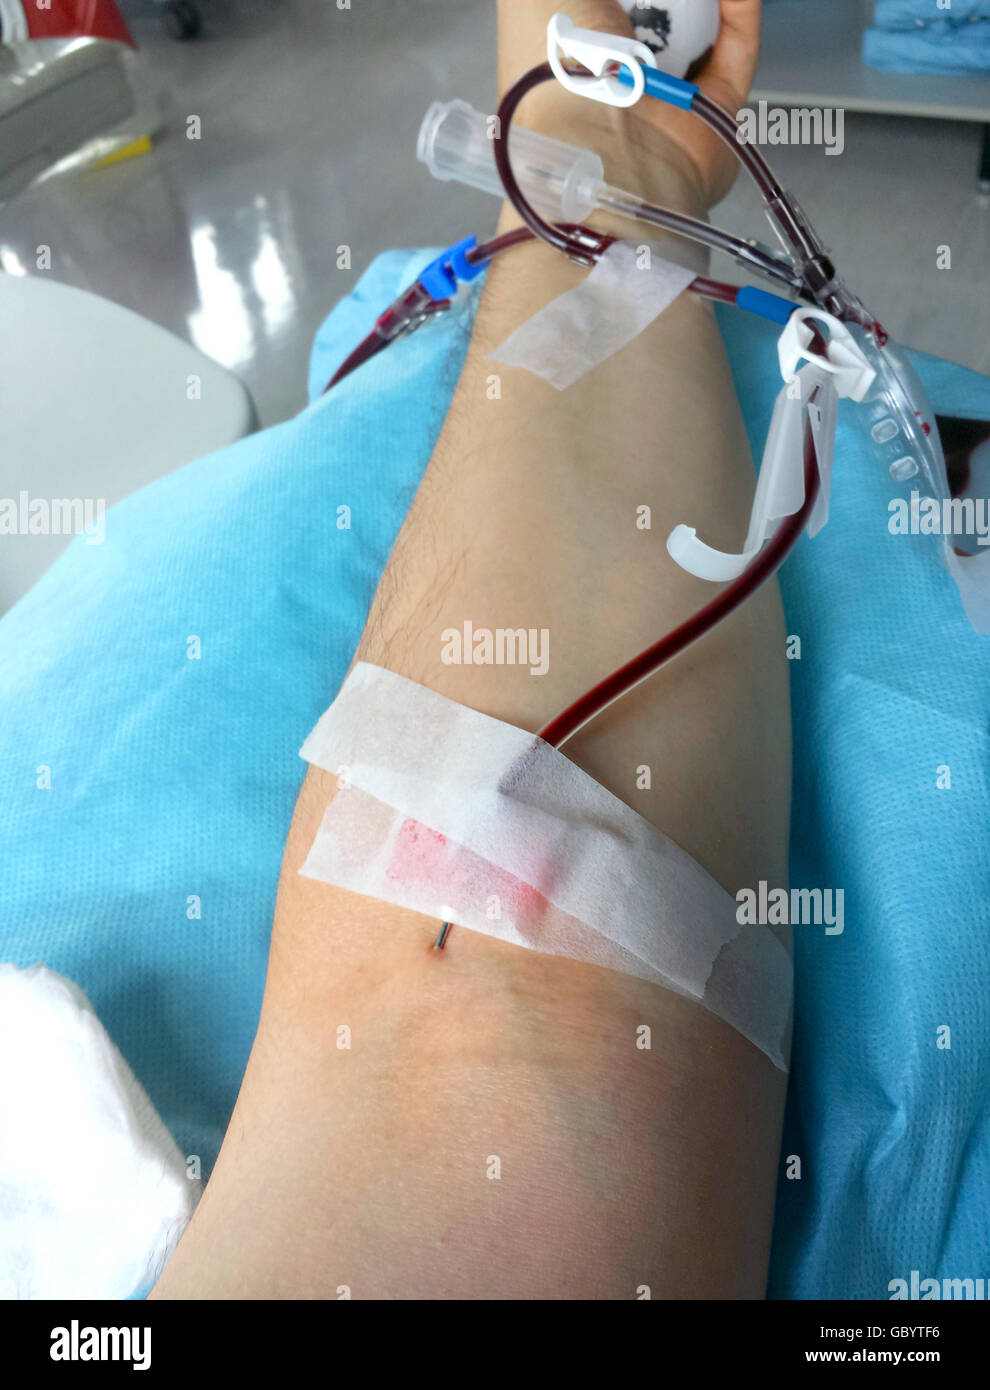 arm of the volunteer when donating blood in hospital Stock Photo